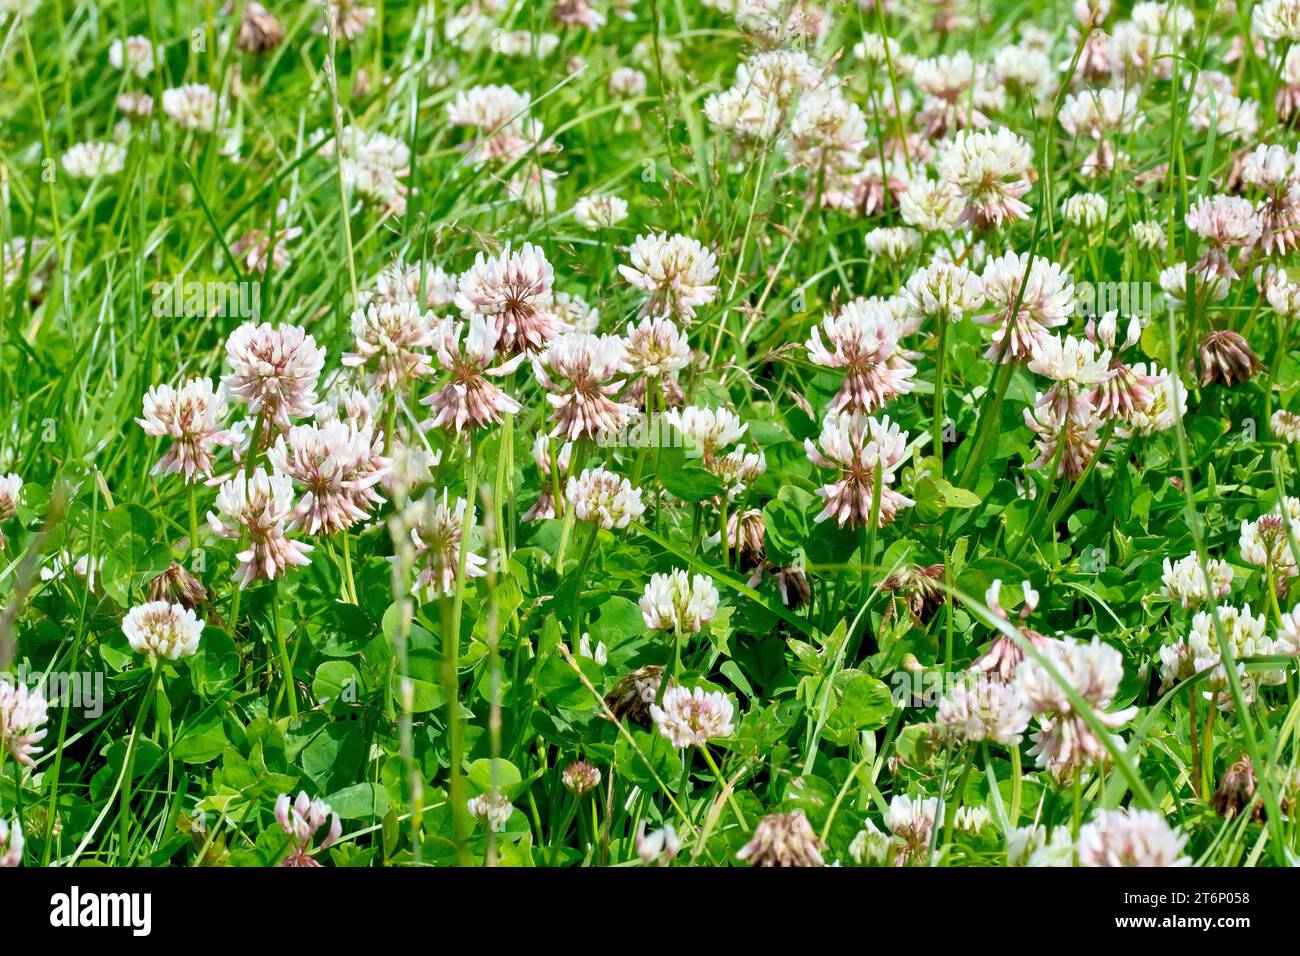 White Clover (trifolium repens), also known as Dutch Clover, close up of a mass of the common white flower growing on a patch of unkempt grass. Stock Photo